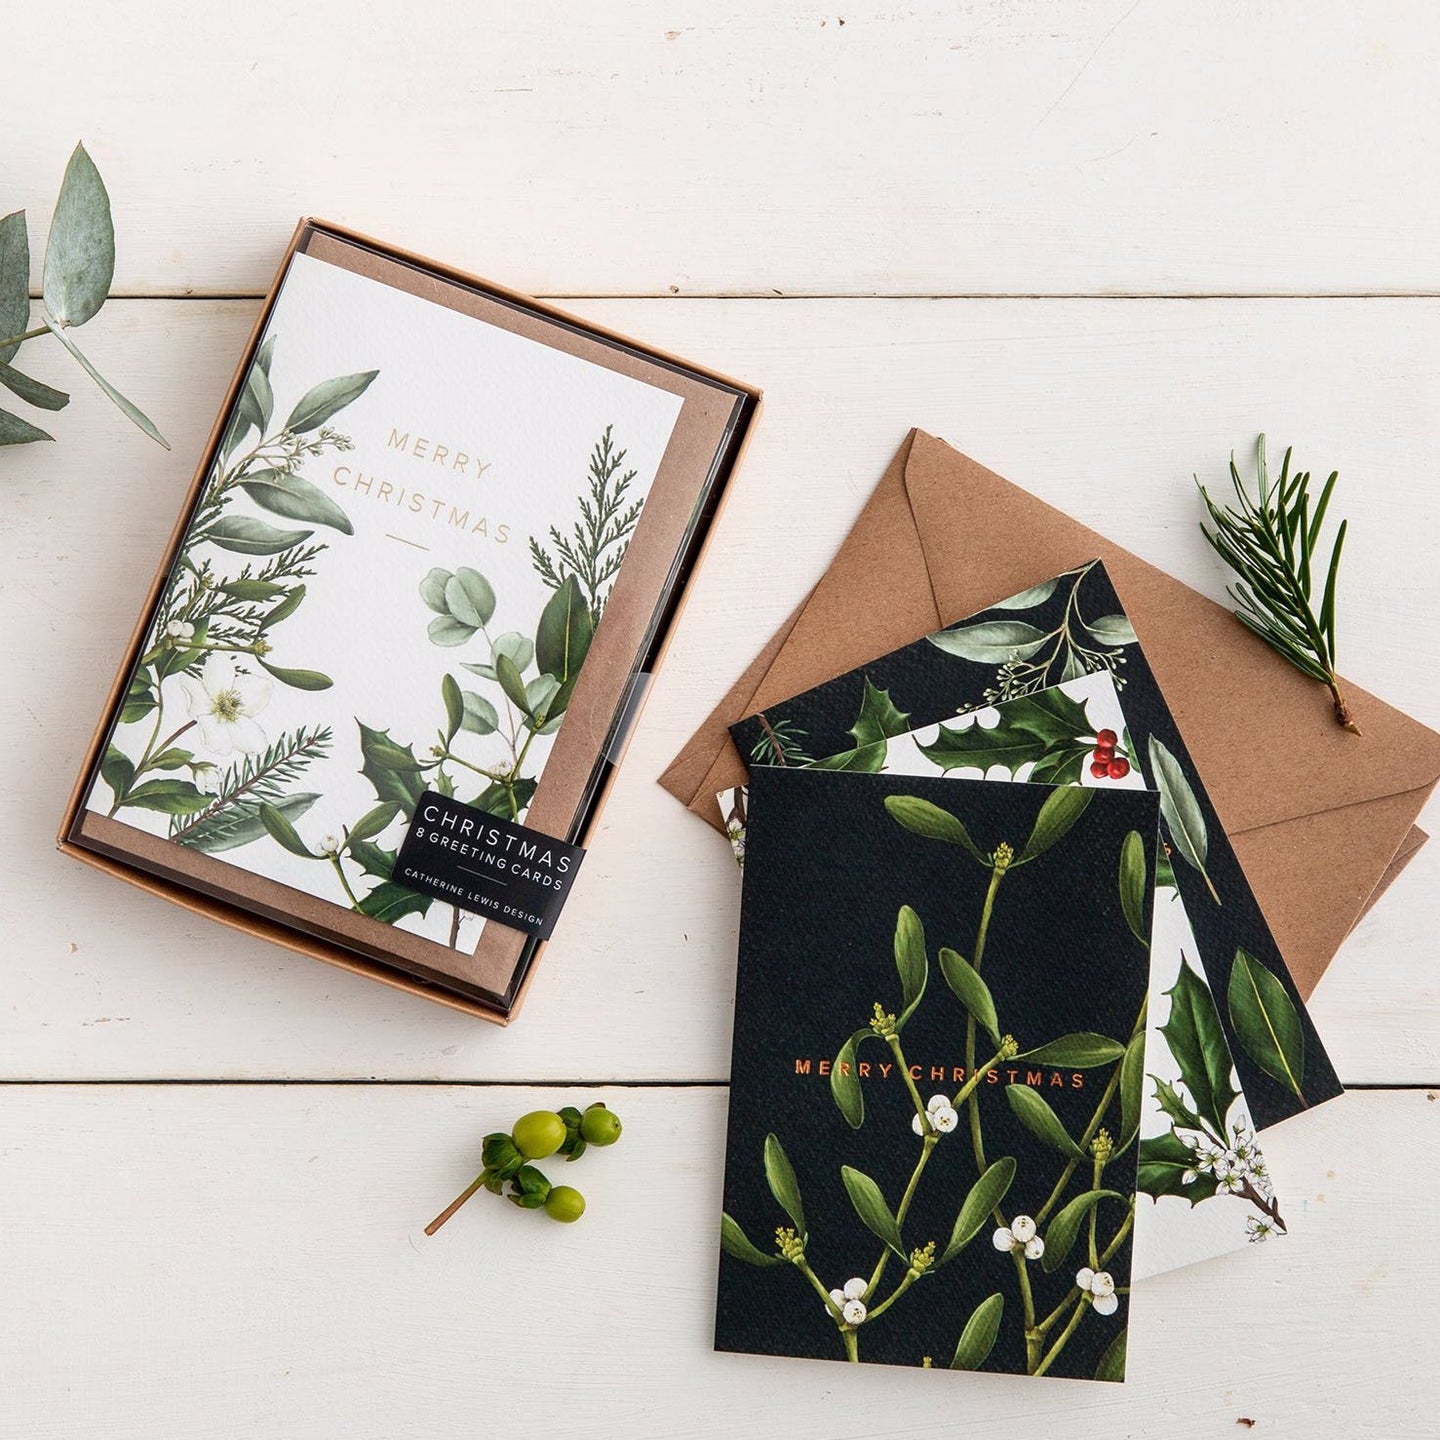 Box of 8 Luxury Botanical Christmas Cards - 'Greenery' Collection